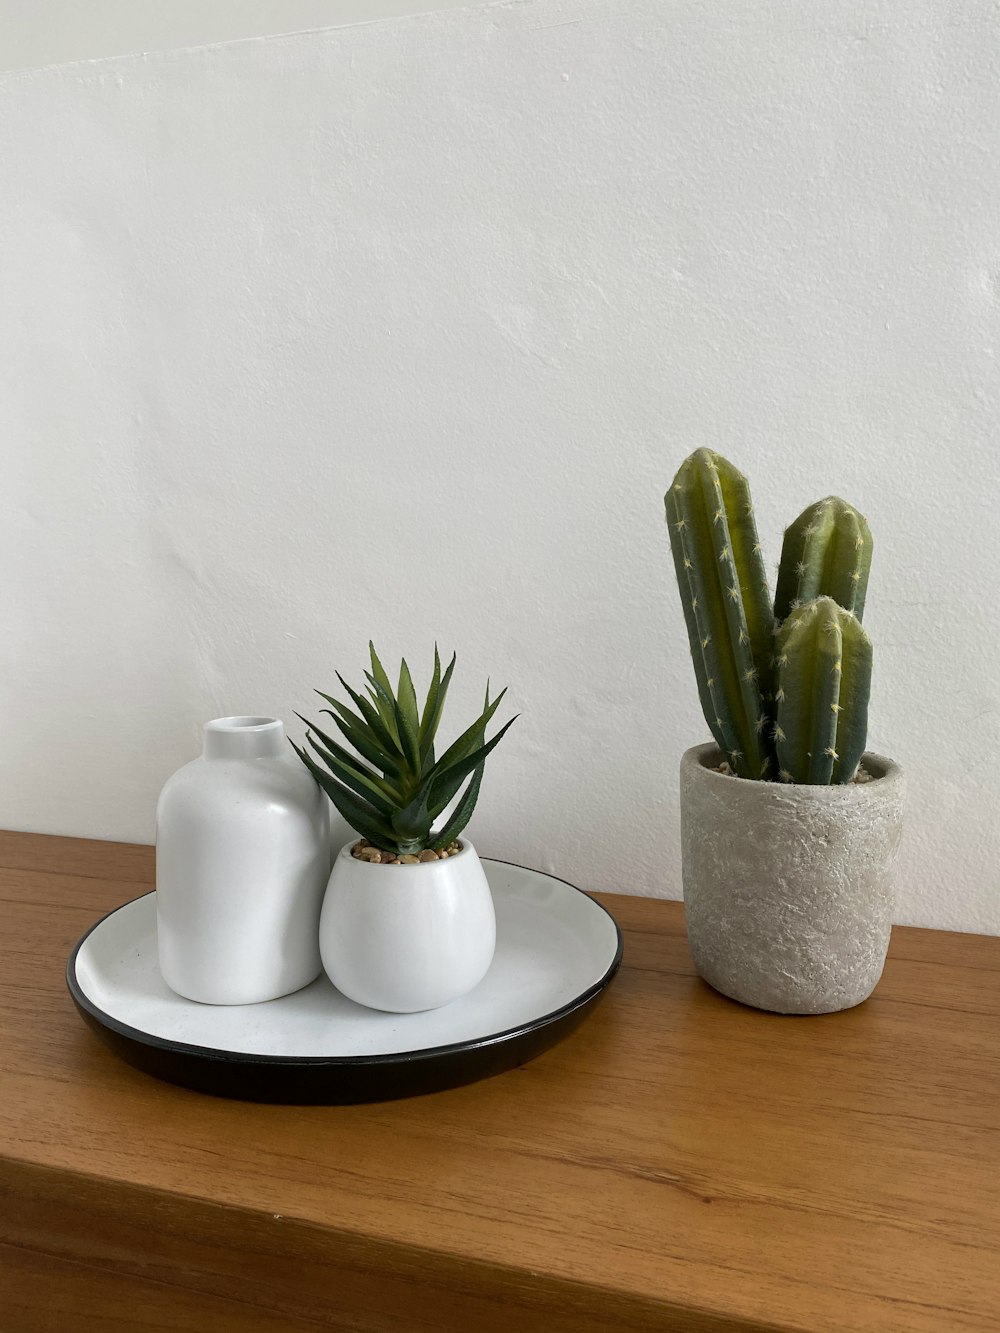 green cactus in white ceramic pot on brown wooden table